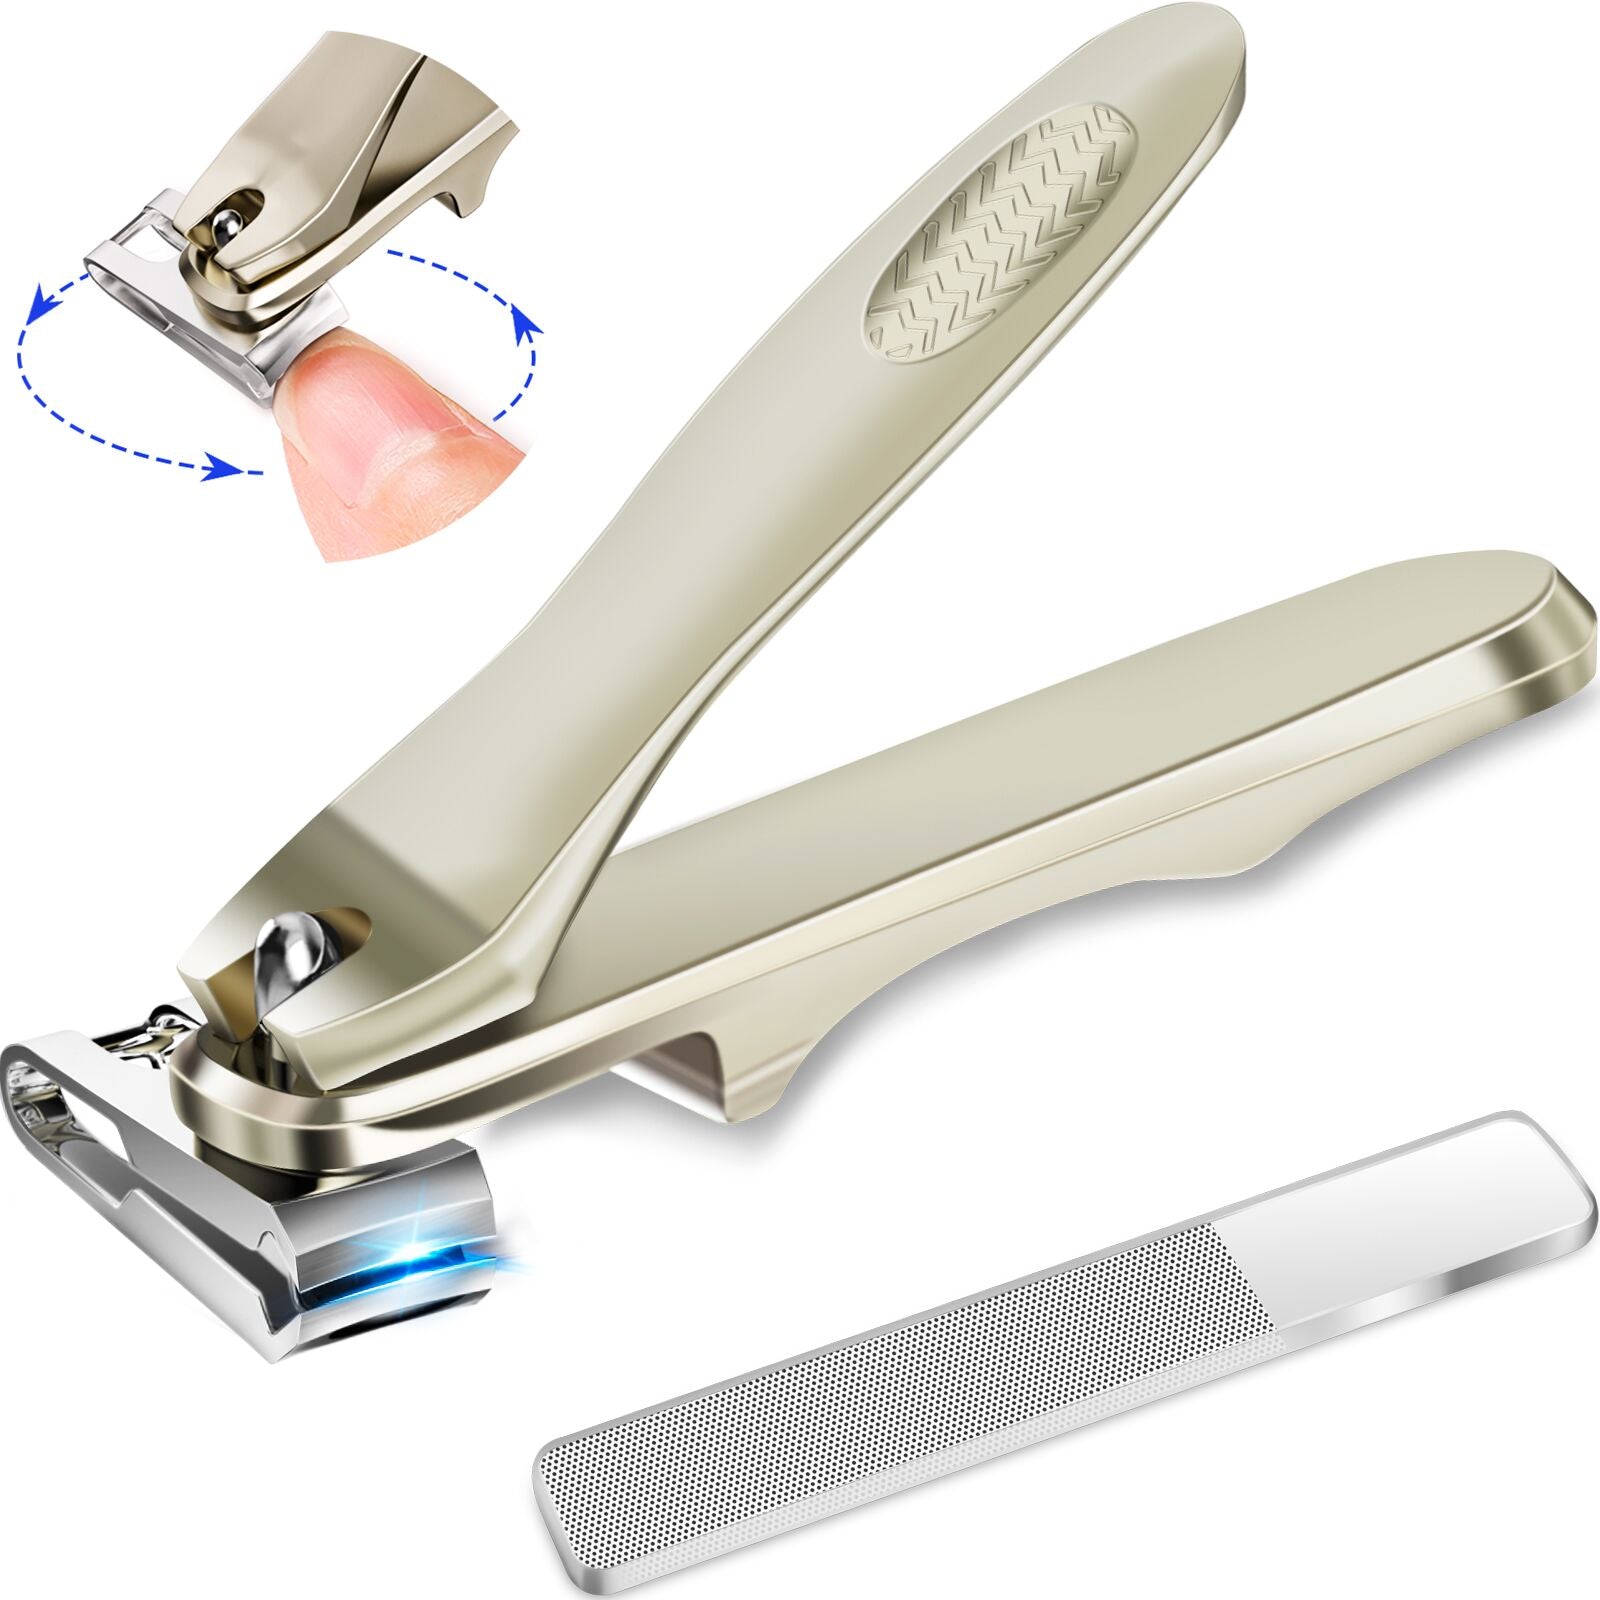 5 Best Nail Clippers for Arthritis